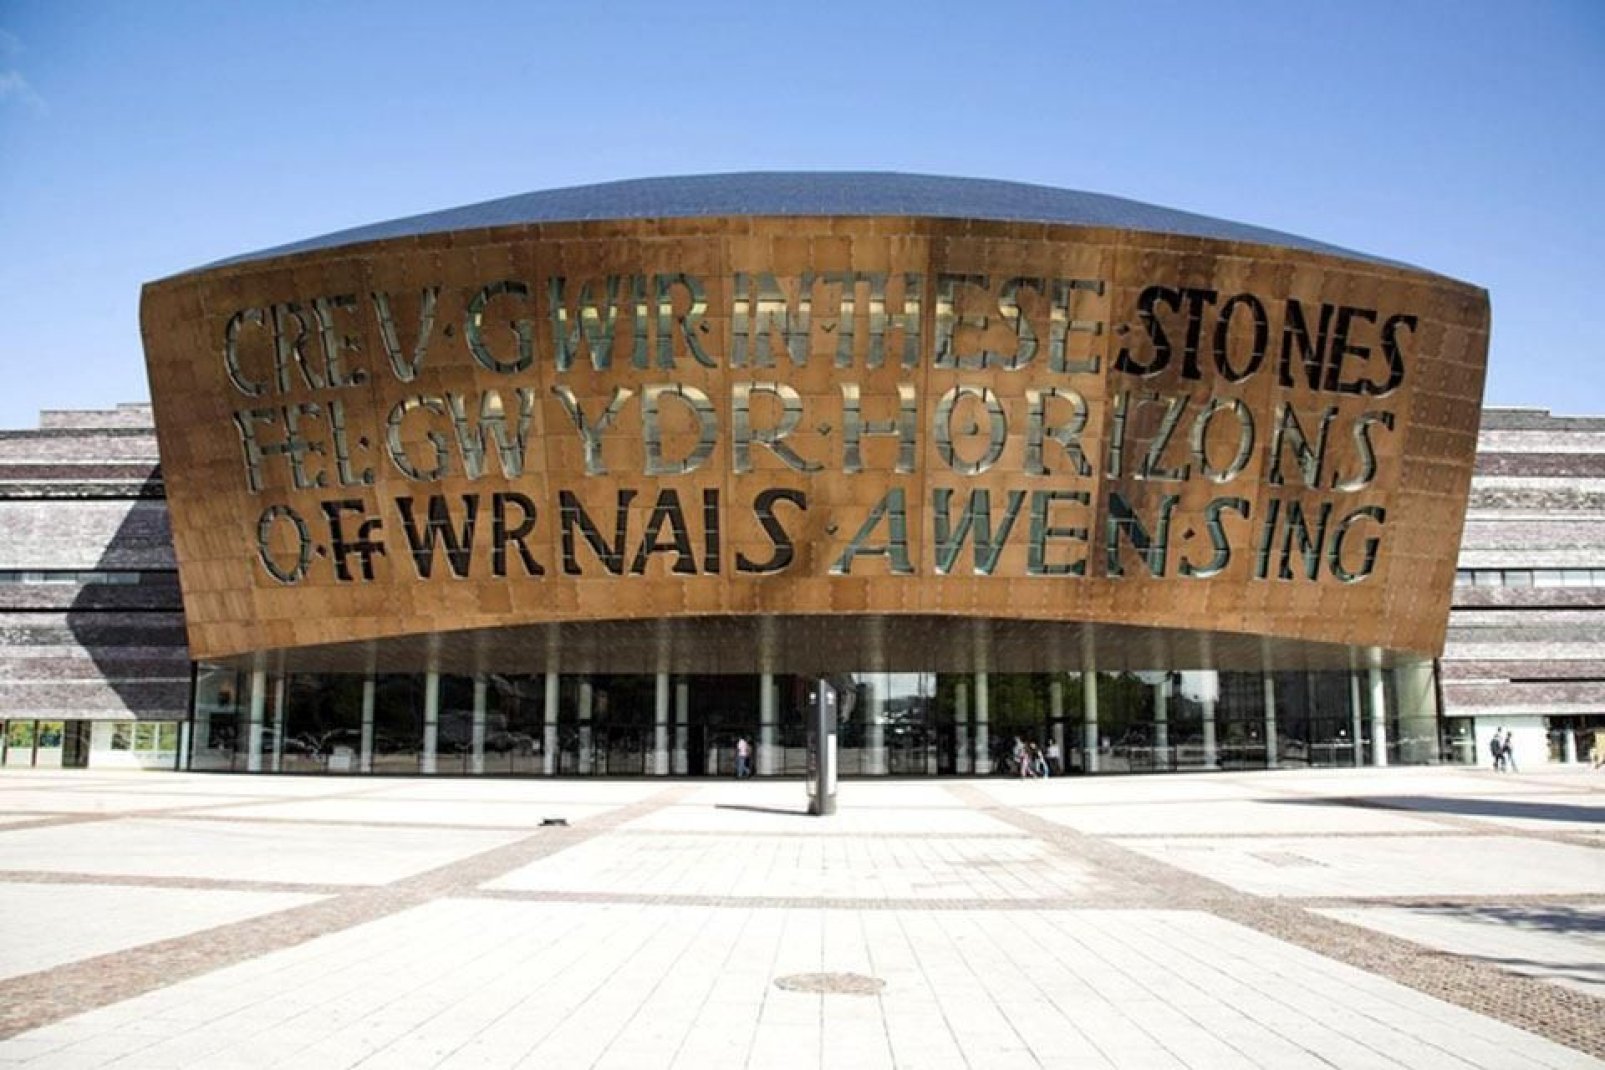 One of the UK's principal cultural centres, the Millennium Centre hosts musicals, opera, ballet, comedy, art and other events